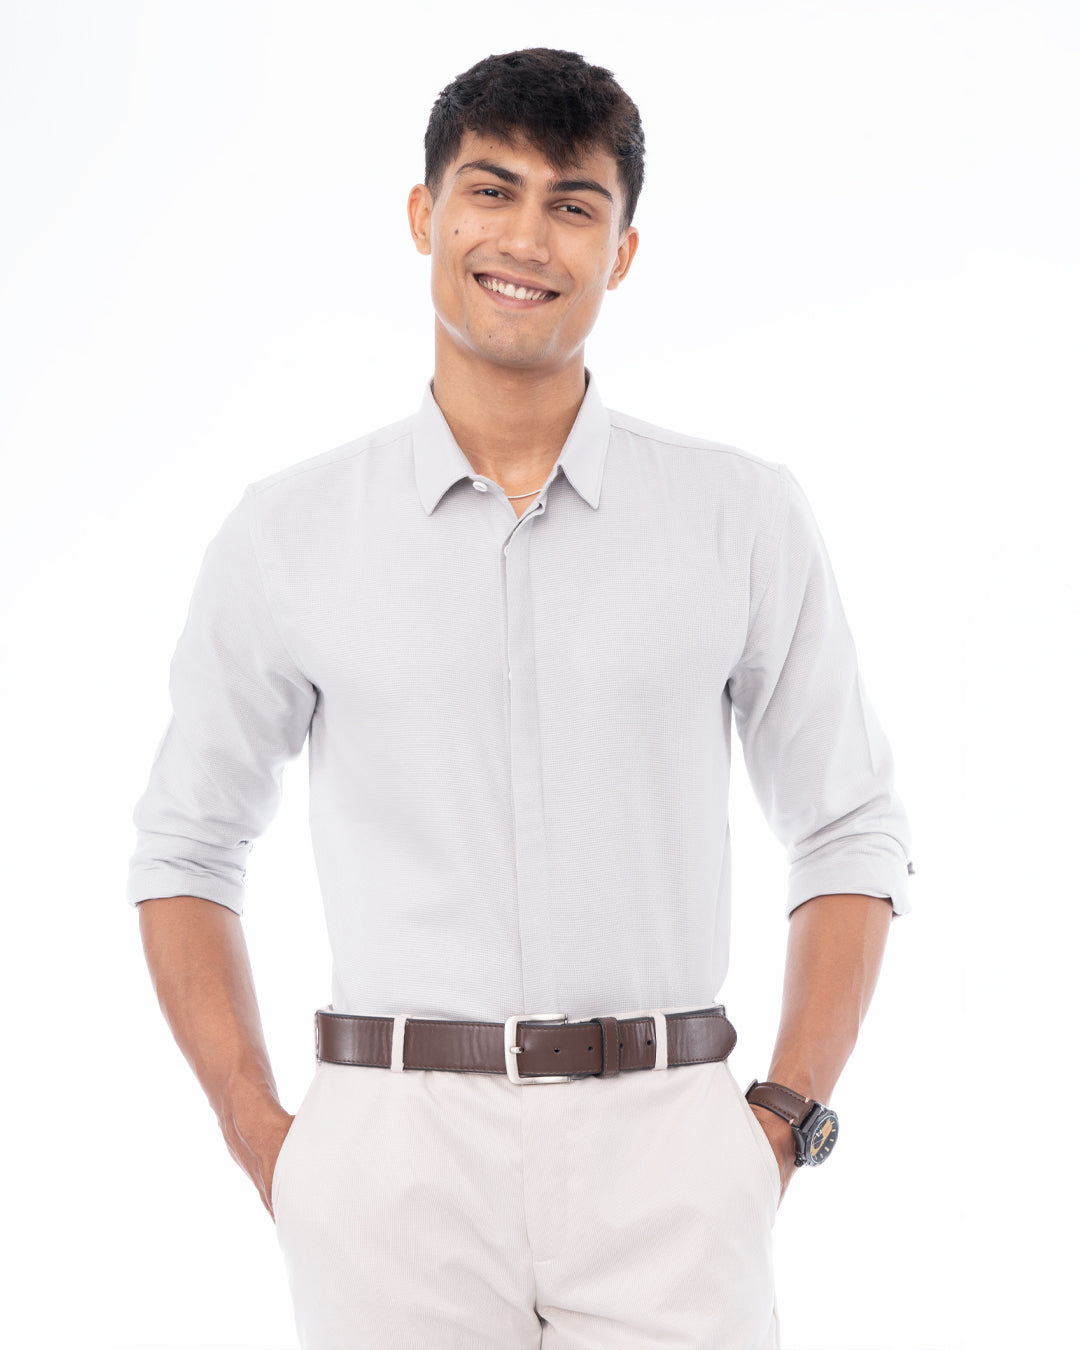 A man with short dark hair smiles at the camera. He is wearing a light gray, long-sleeved, Ash Grey - Classic Shirt and white pants. With one hand in his pocket, he stands against a plain white background, showcasing perfect everyday wear.